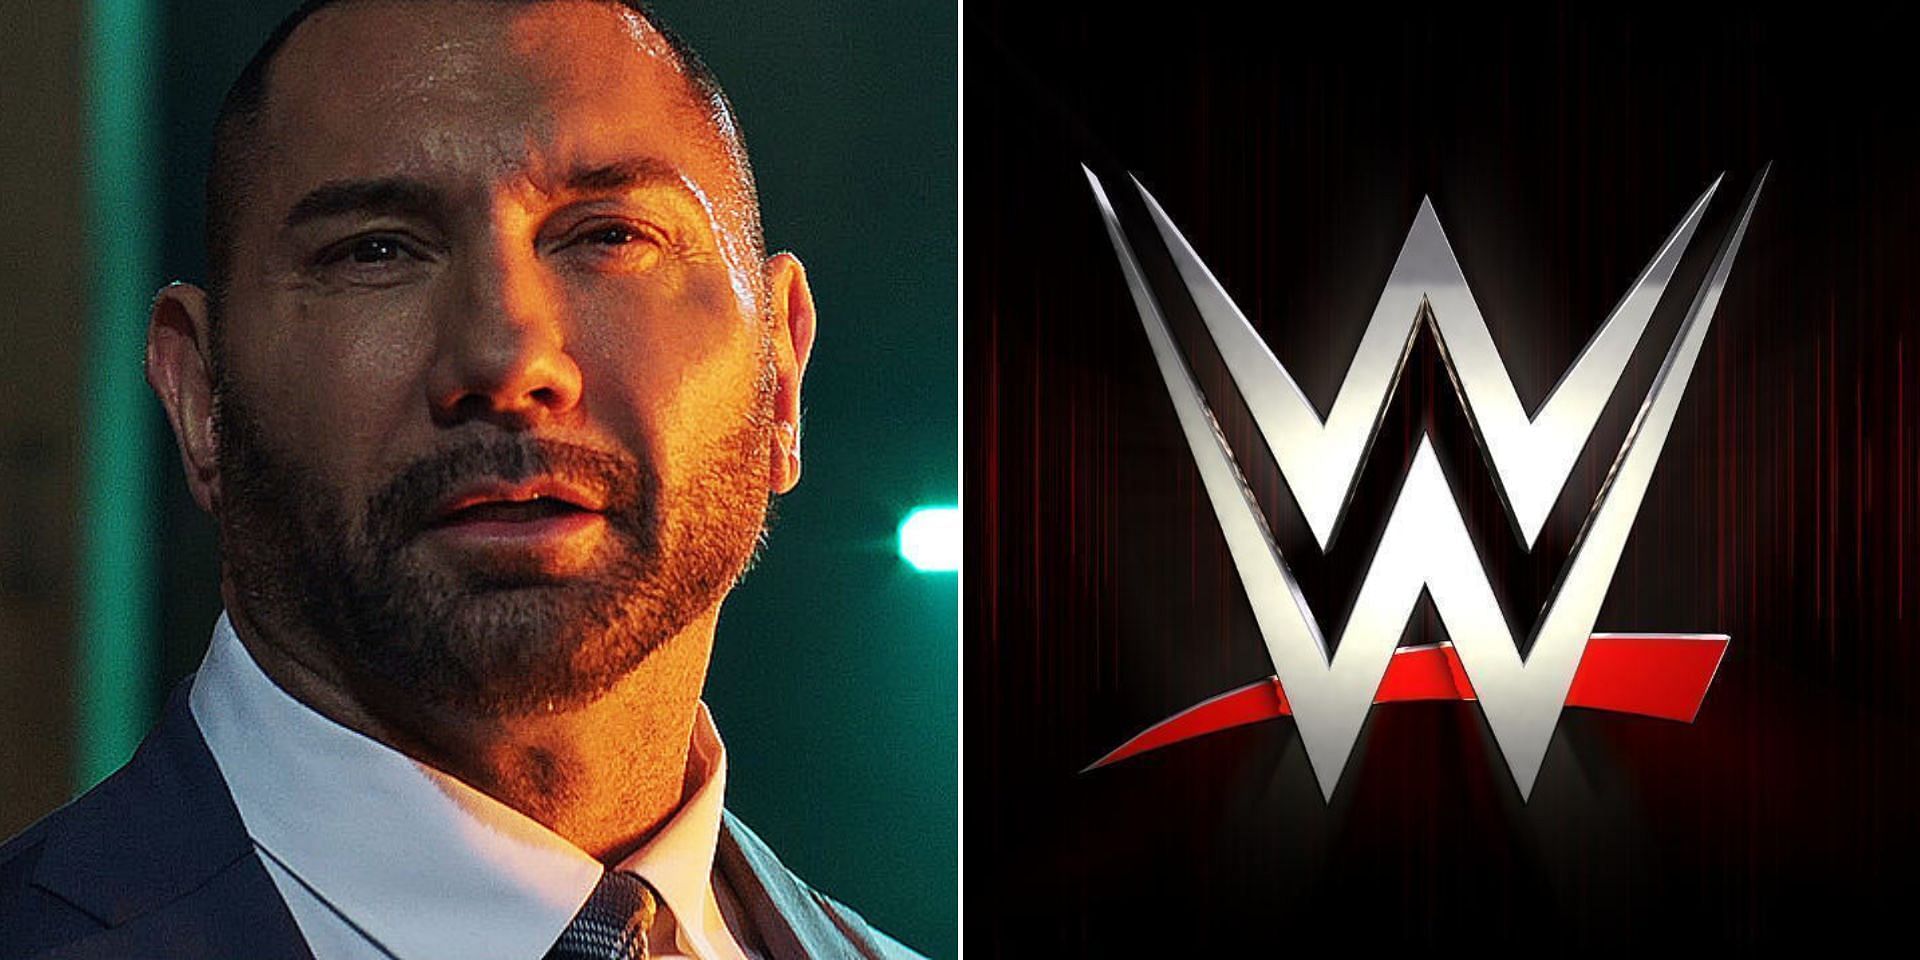 Batista is a multi-time WWE world champion 